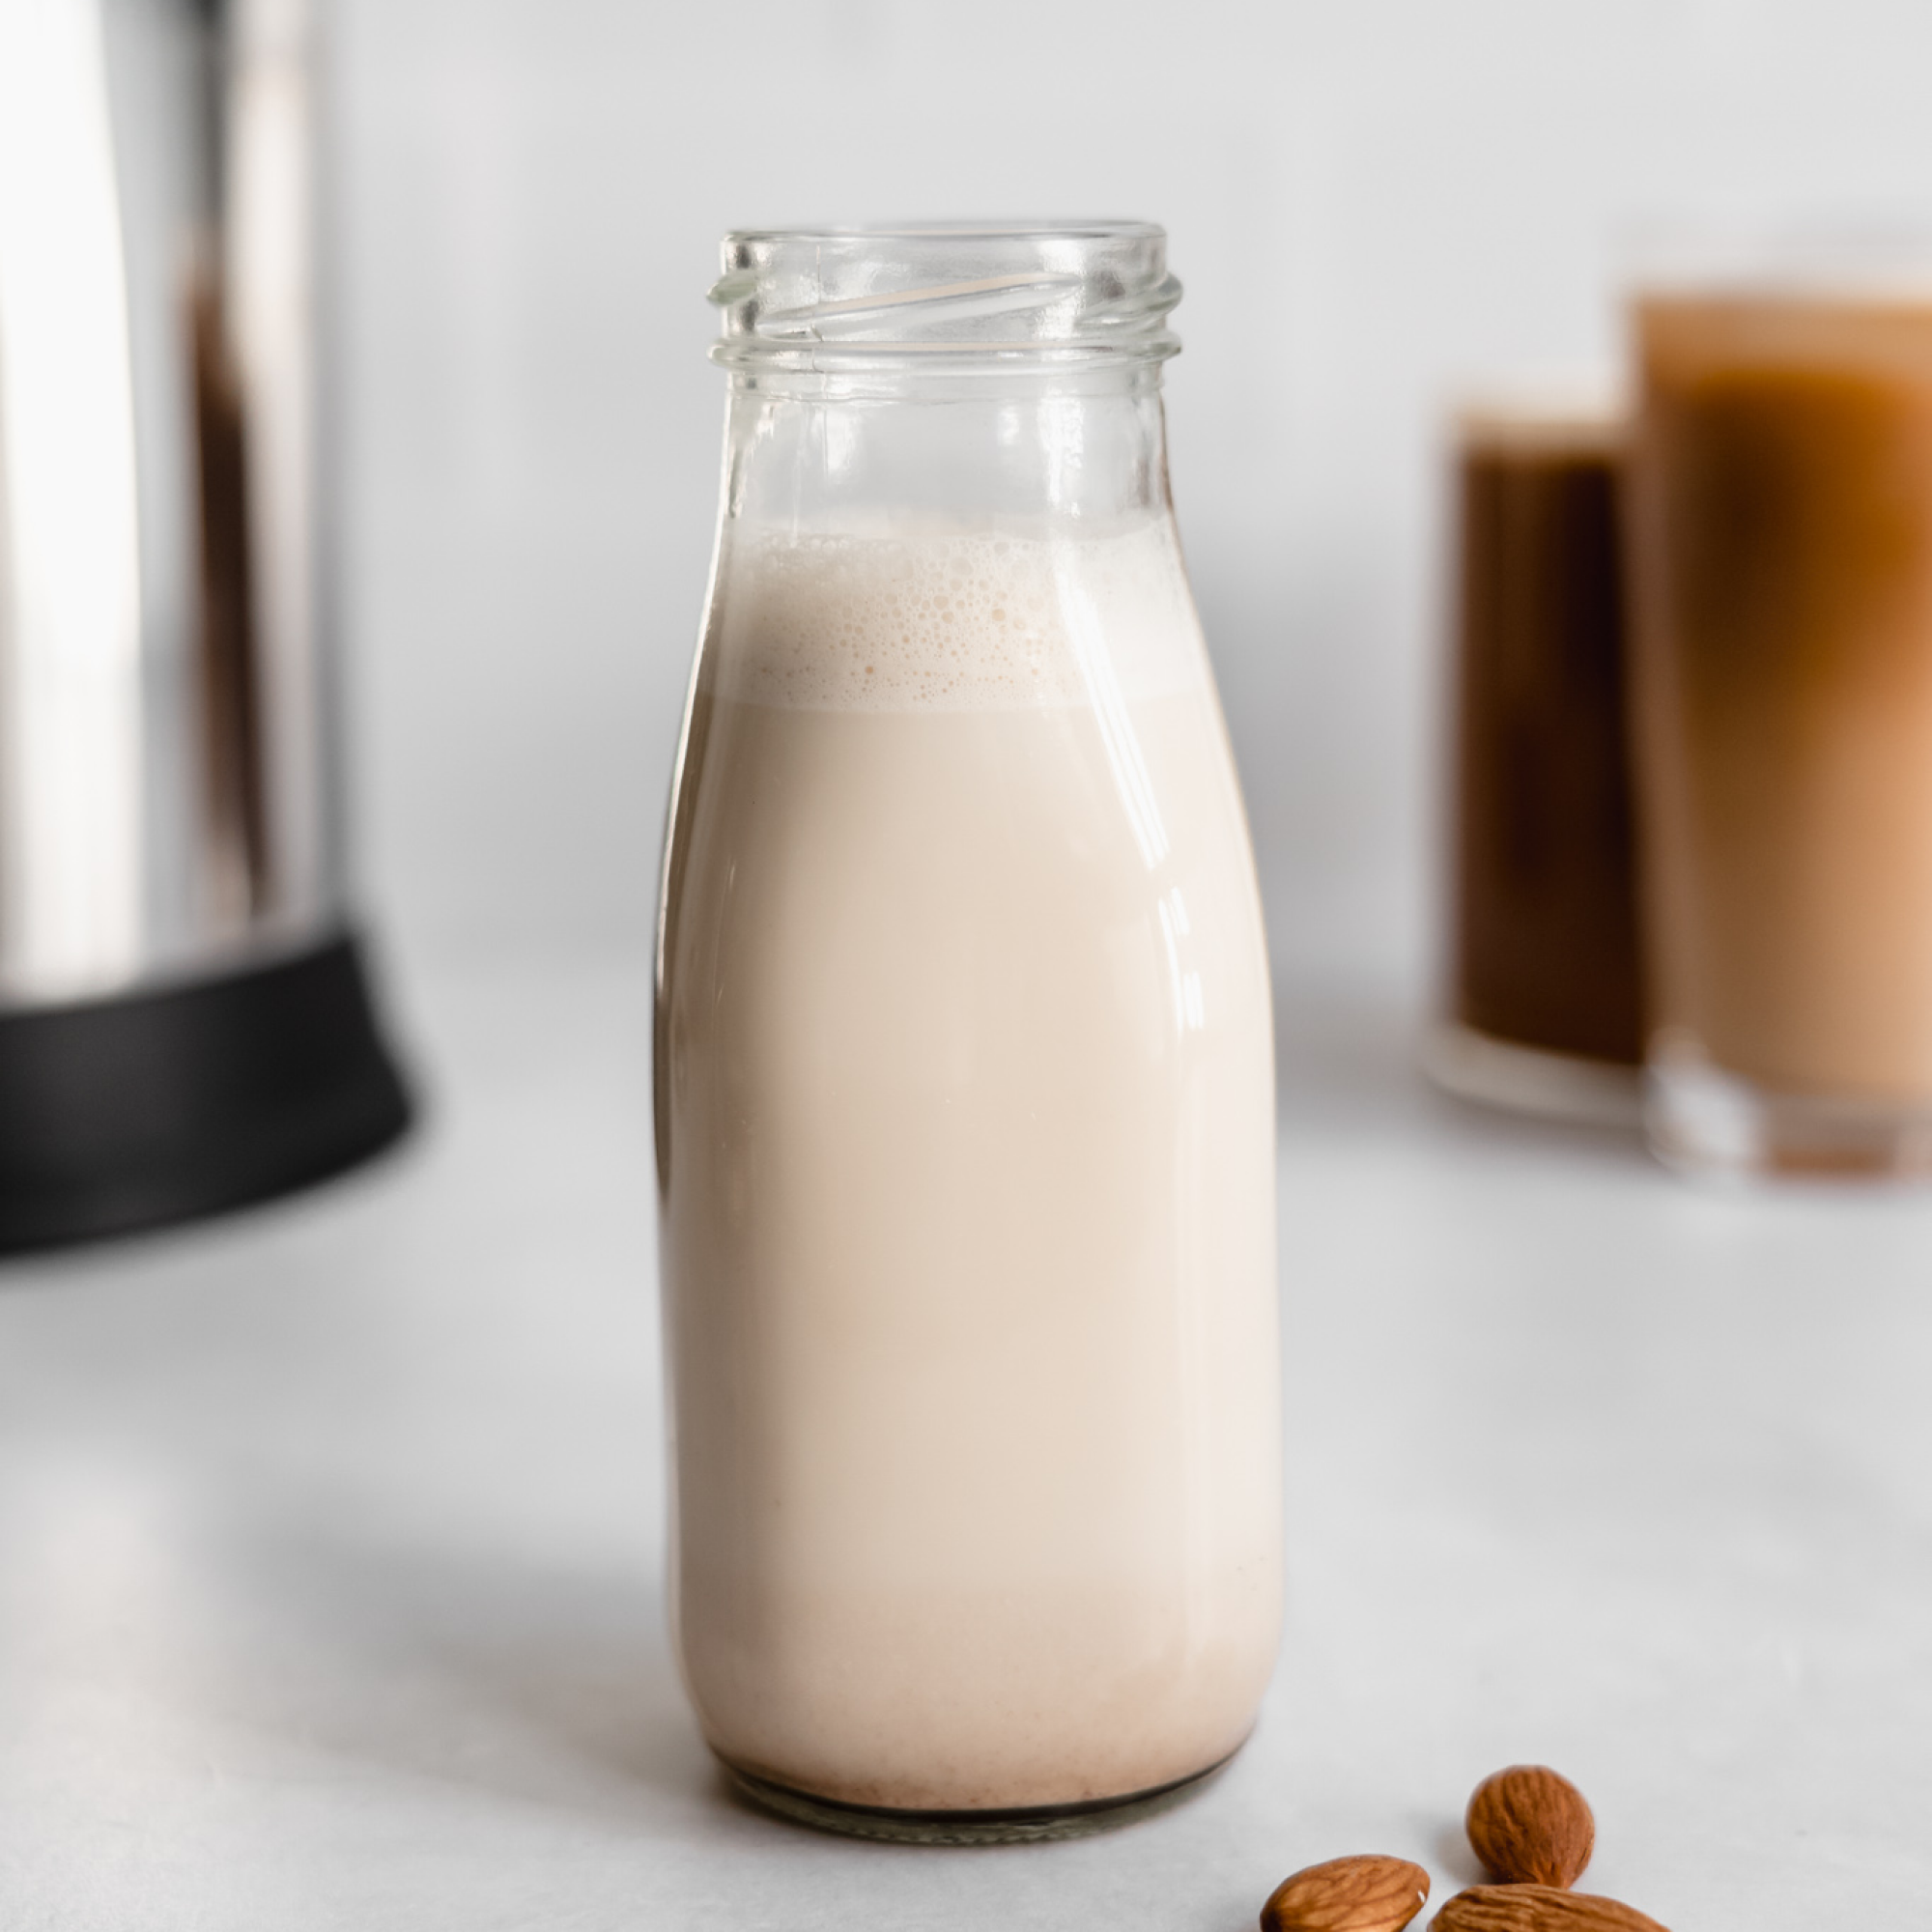 Dairy-free Barista Blend Almond Creamer, freshly made with the Almond Cow machine